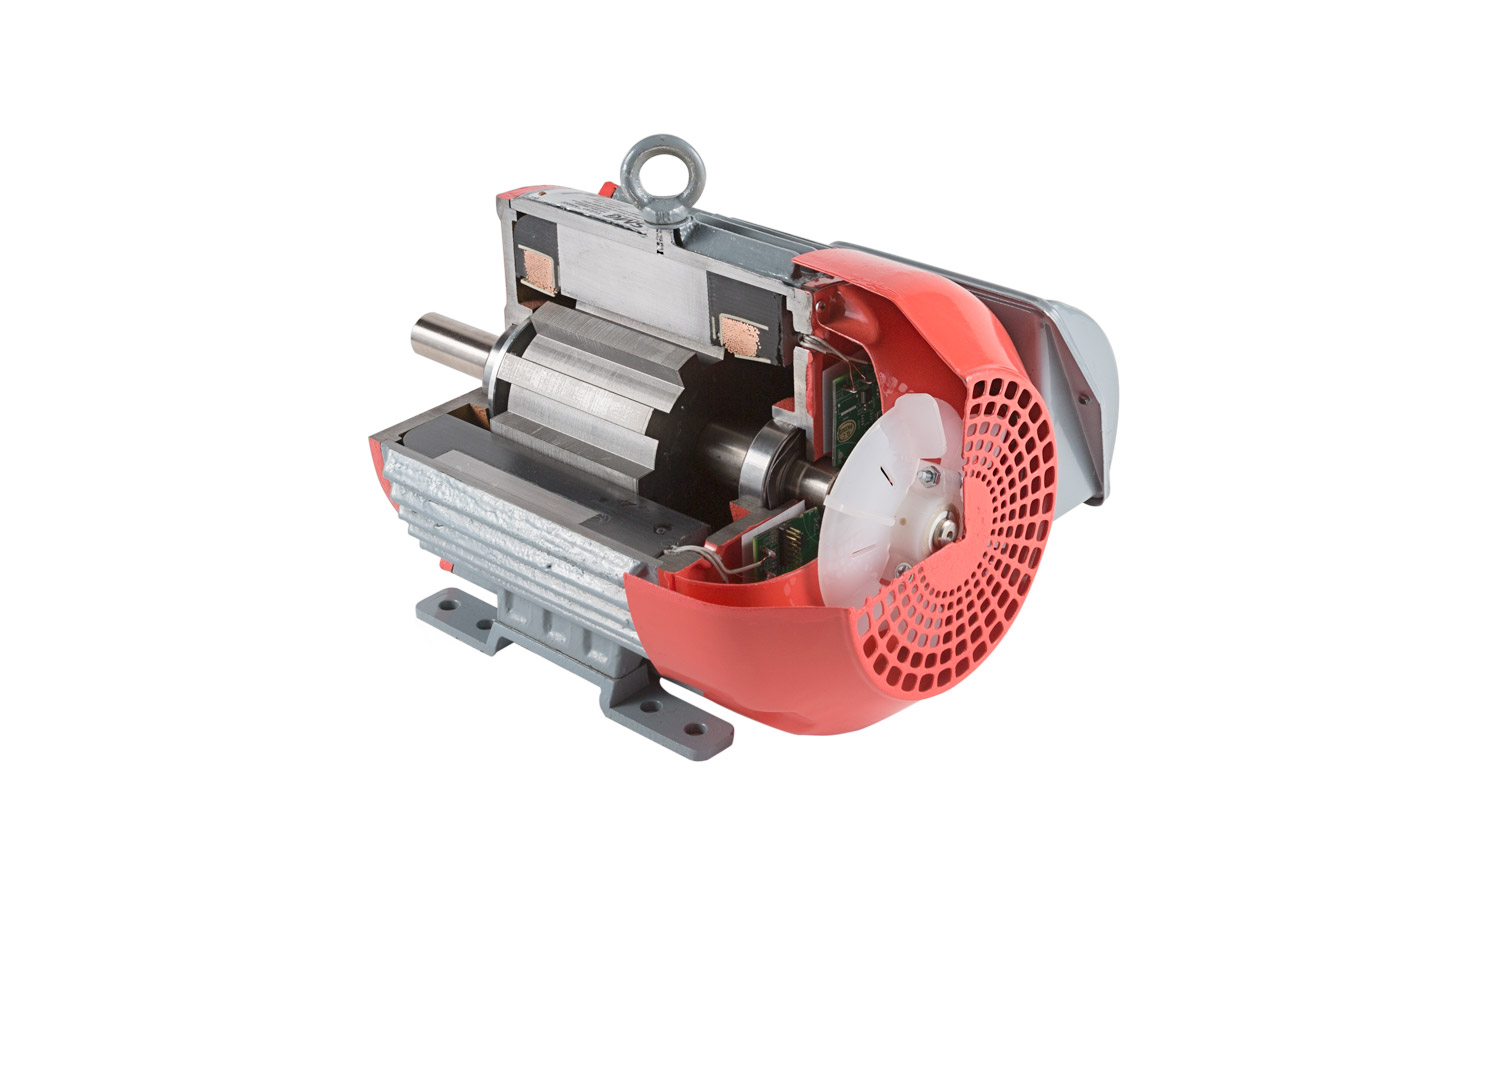 Motor cut away rear switched reluctance motor